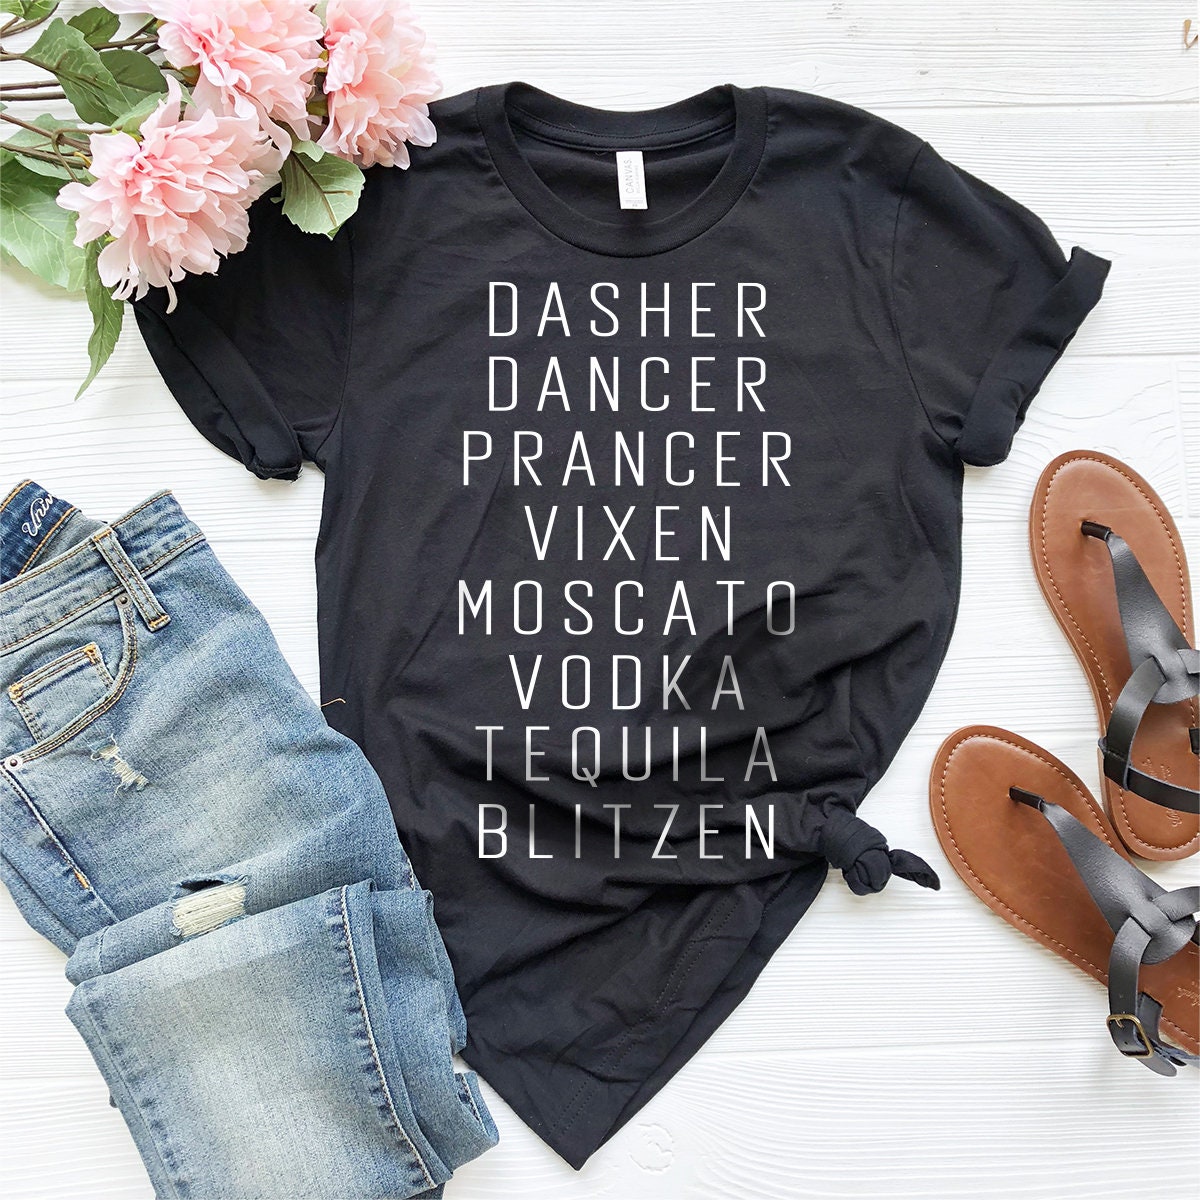 Funny Christmas Shirt, Funny Drinking Shirt, Funny Alcoholic Shirt, Drinking Party Tee, Dasher Dancer Prancer Vixen Moscato Vodka Tequila - Fastdeliverytees.com